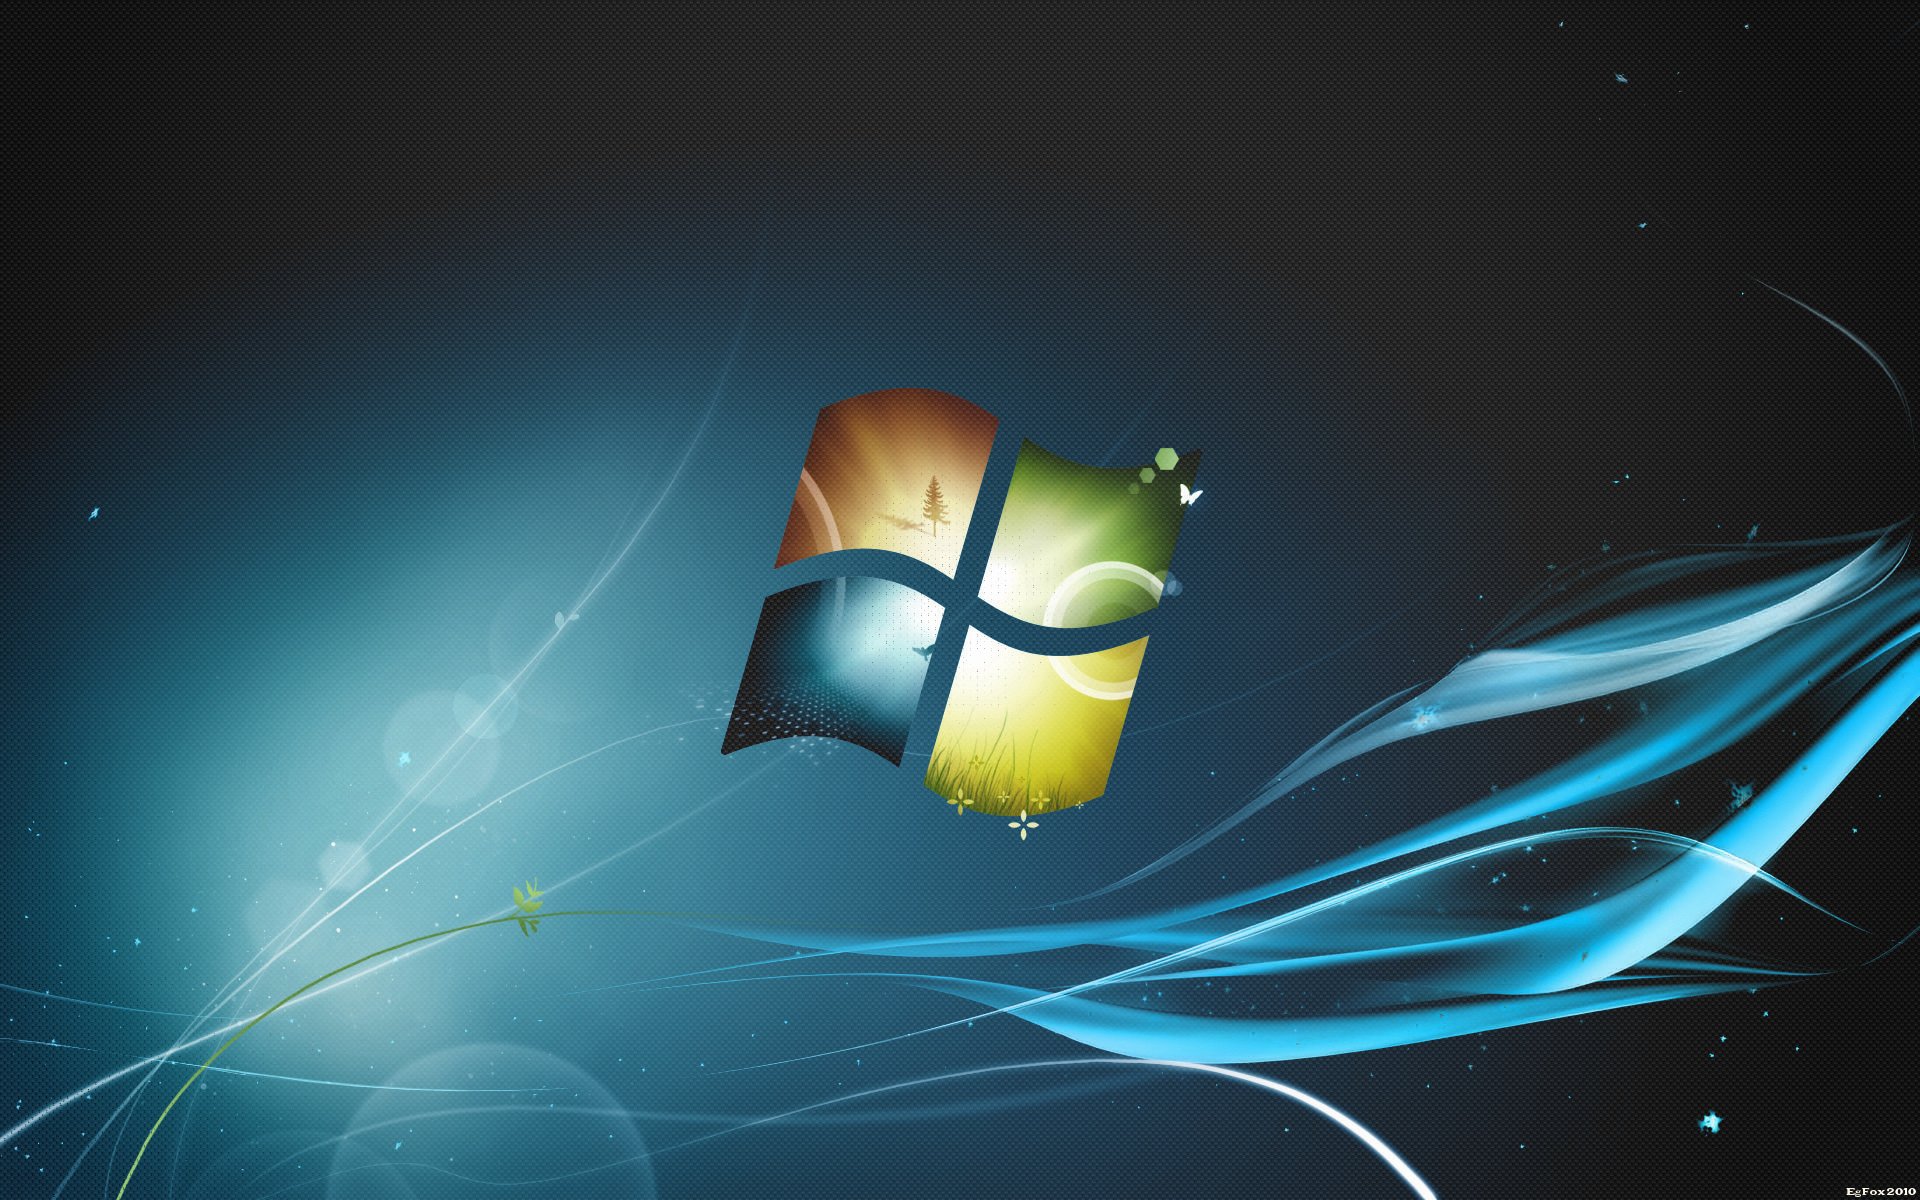 windows 7 backgrounds hd wallpapers windows 7 backgrounds hd 1920x1200